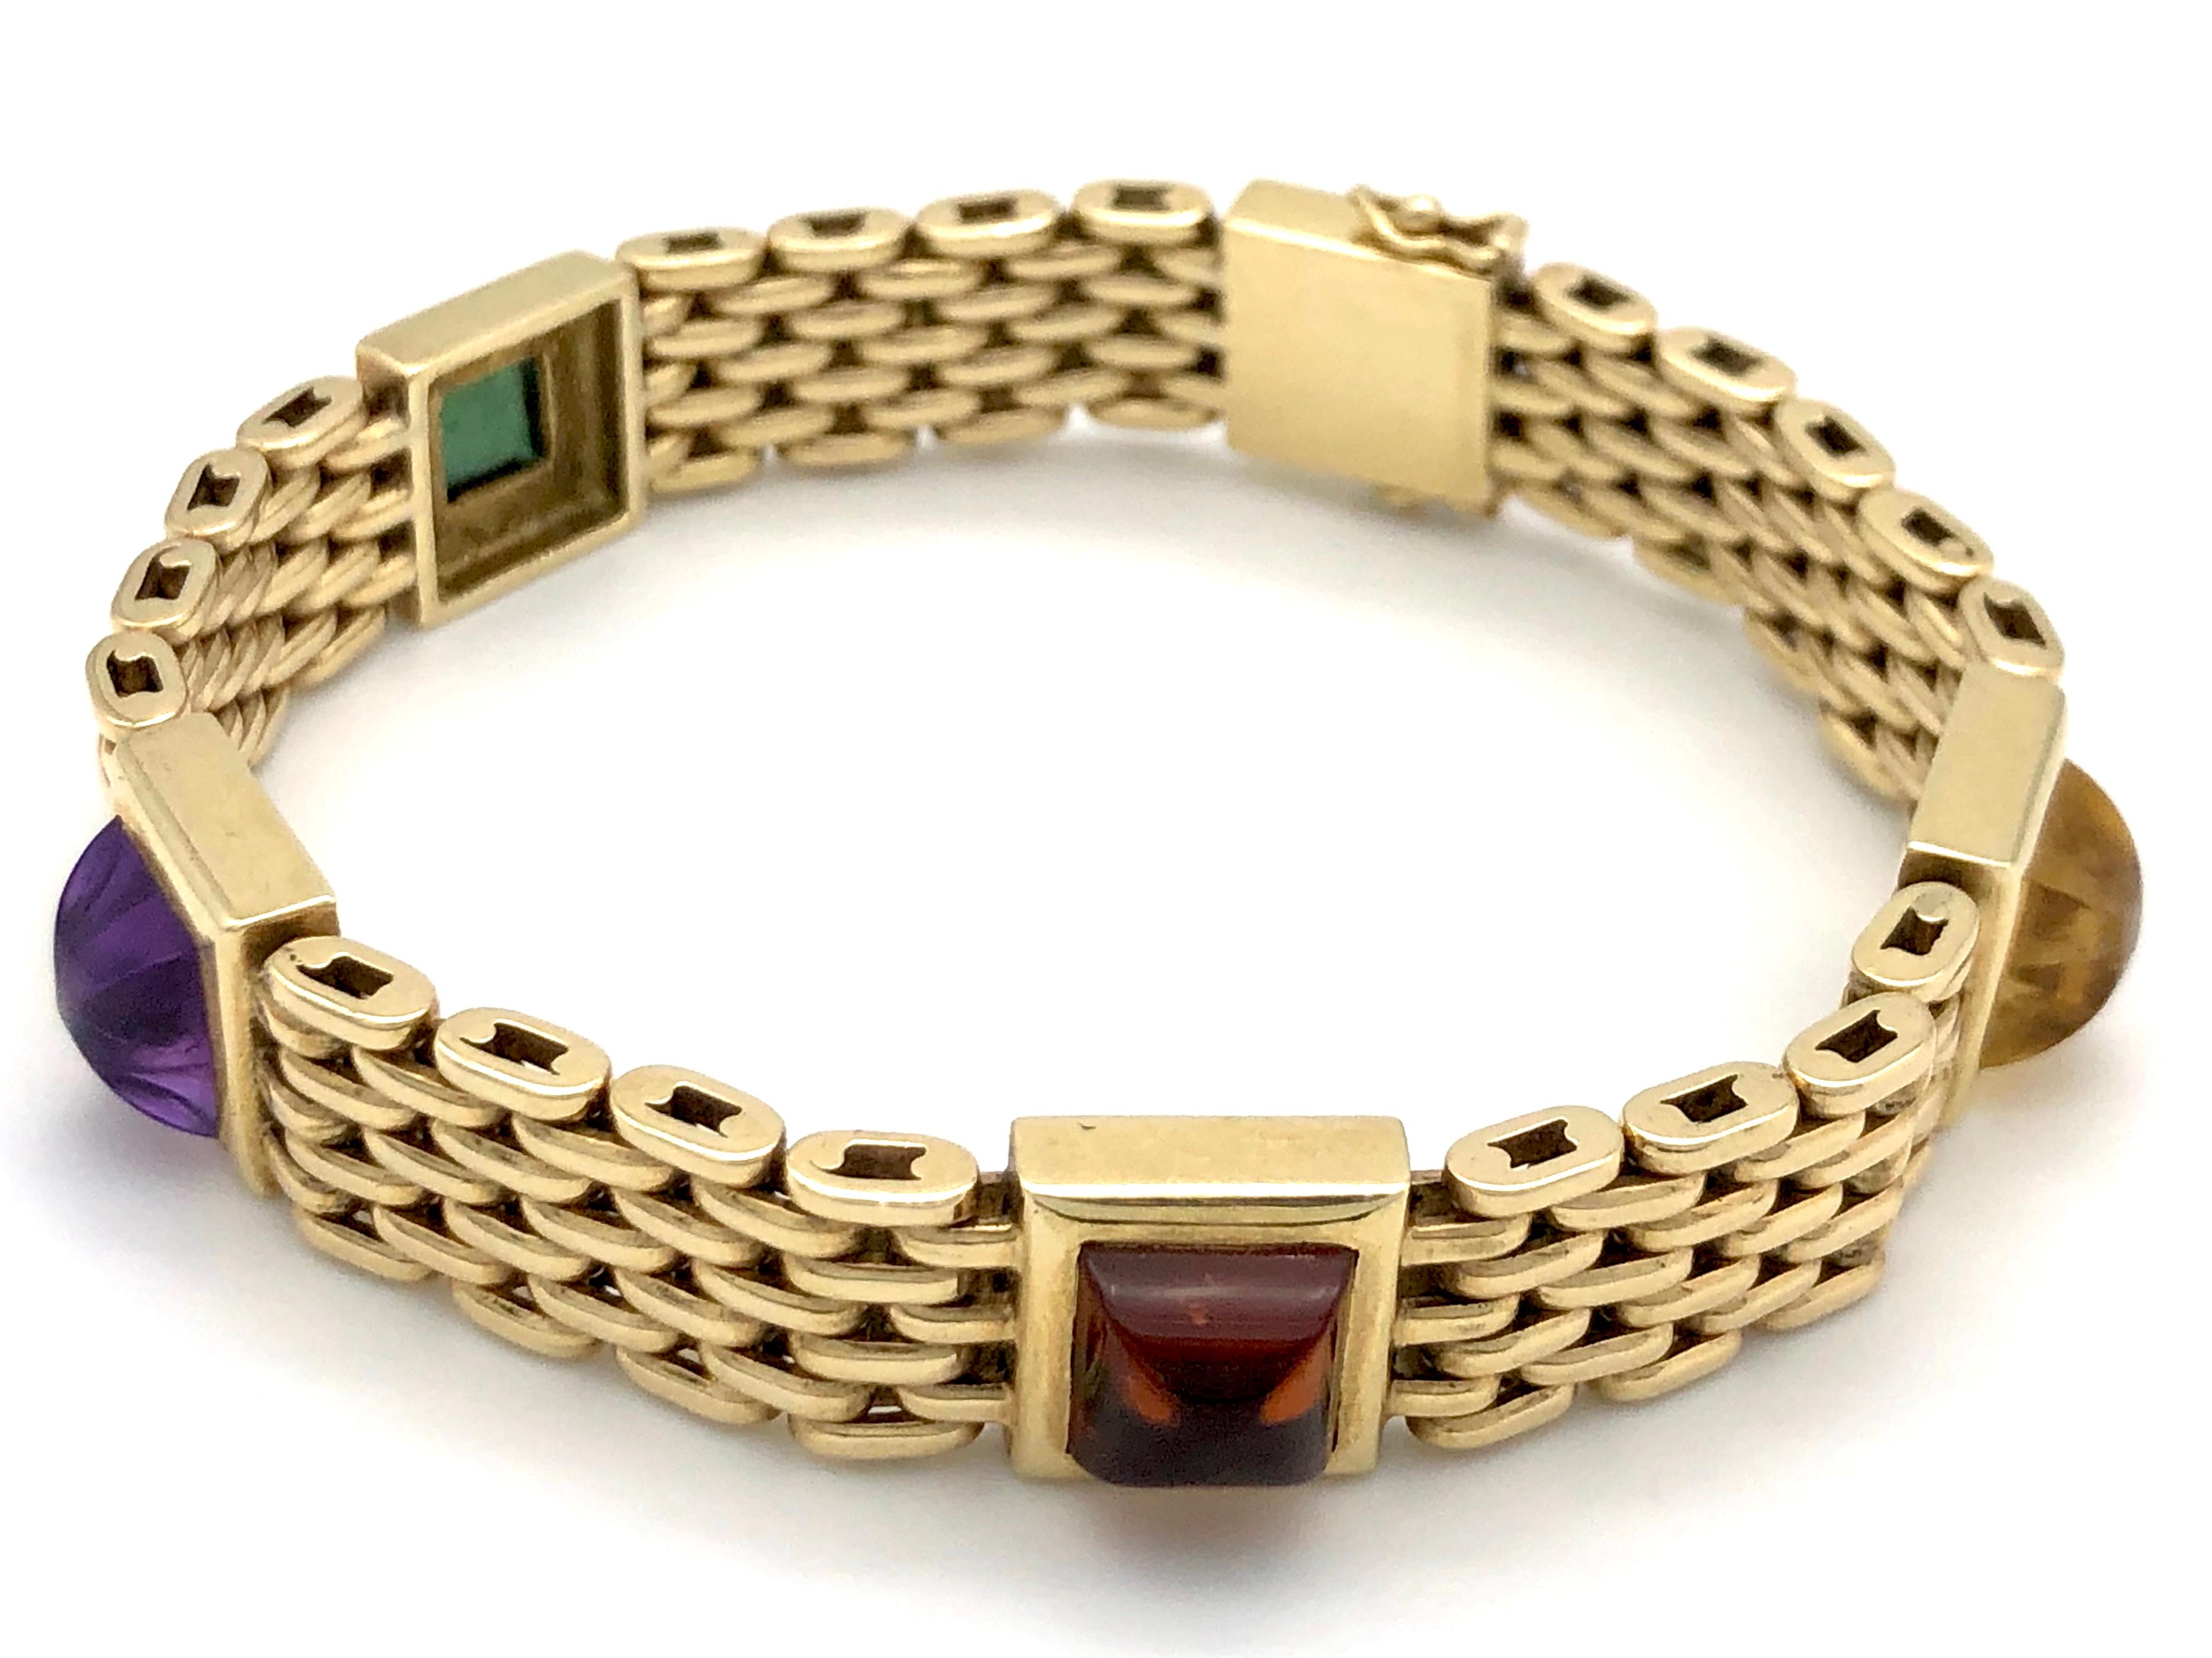 The 14K gold gate bracelet is set with an amethyst, a tourmaline, an aquamarine and two citrines in sugarloaf cut. The bracelet shows the makers mark 